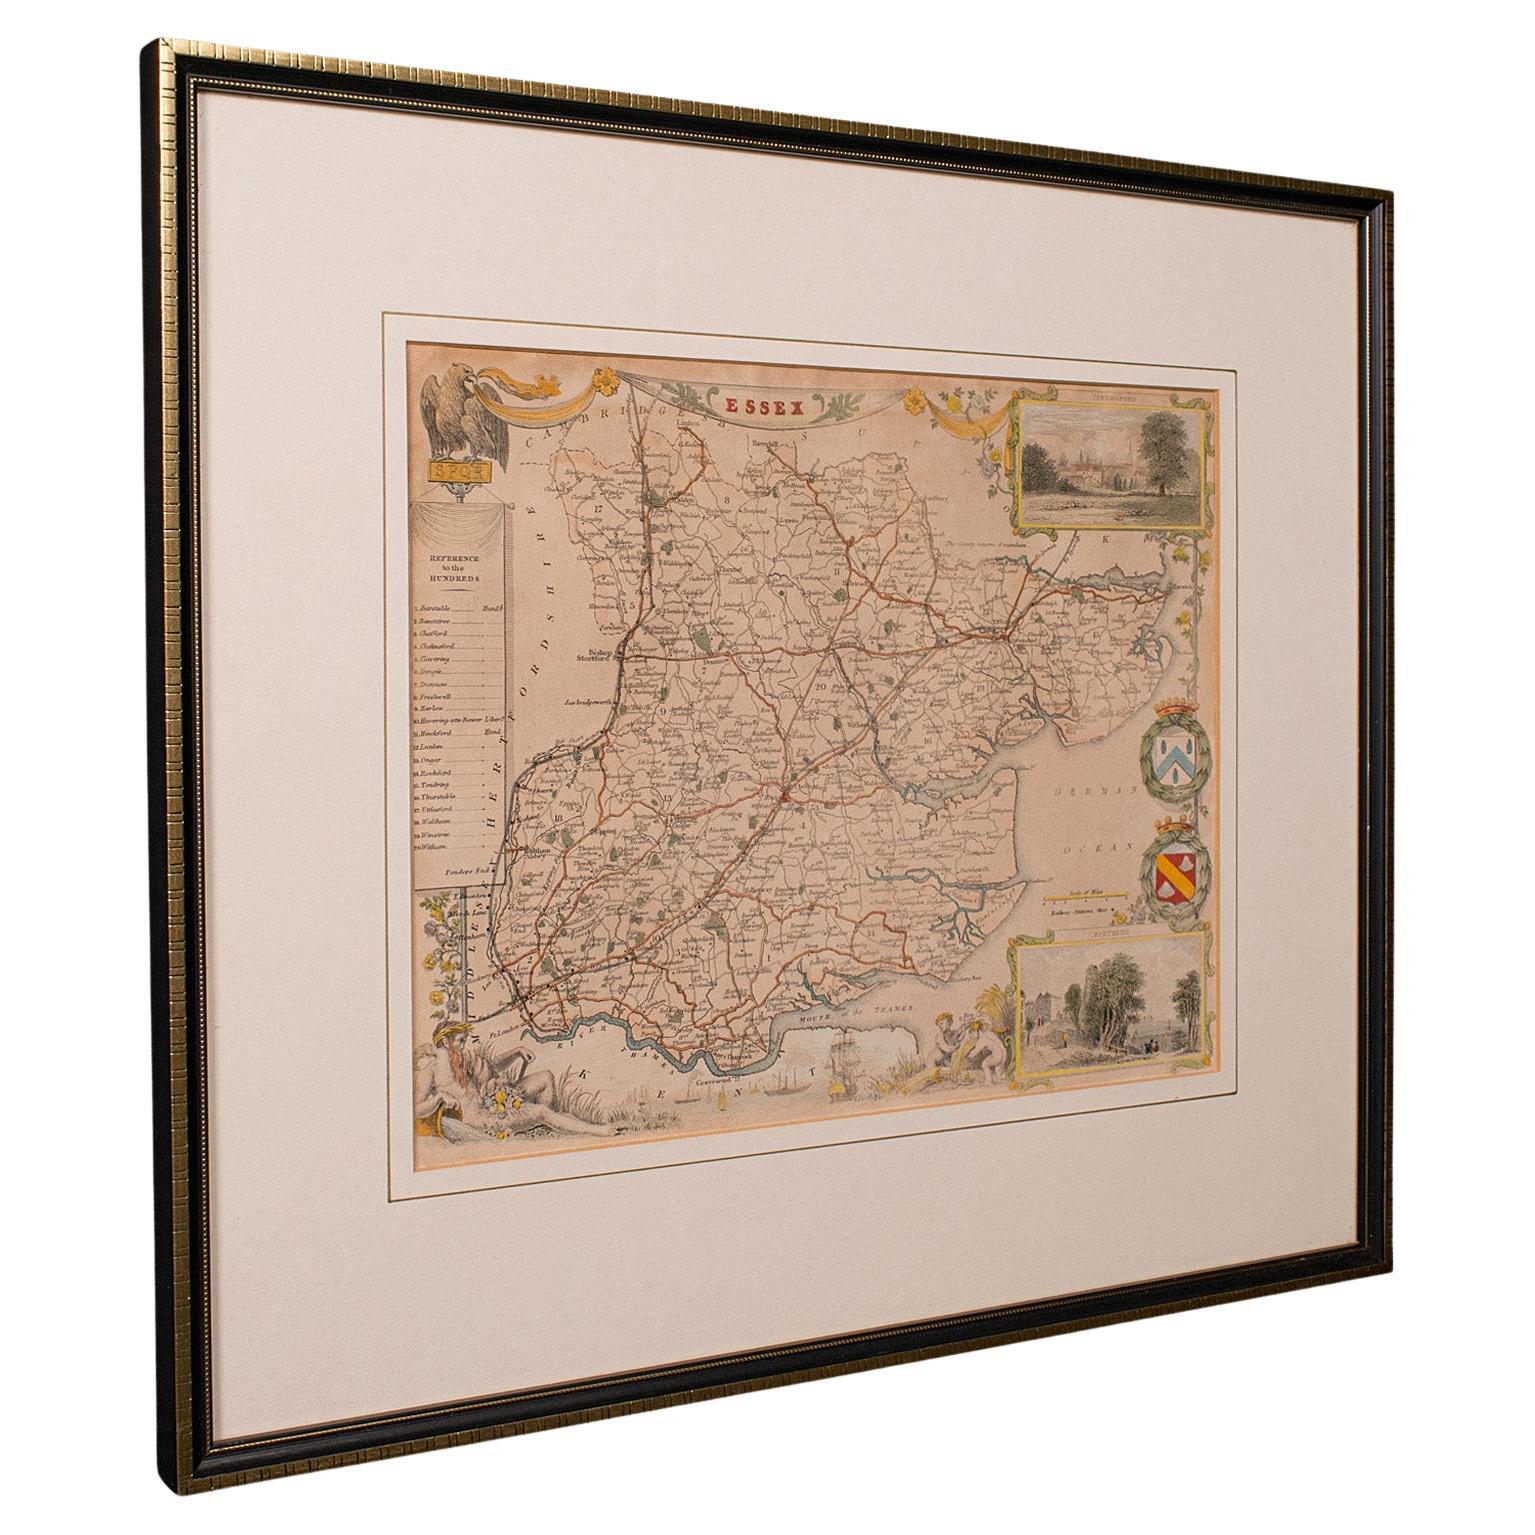 Antique County Map, Essex, English, Framed, Cartographic Interest, Victorian For Sale